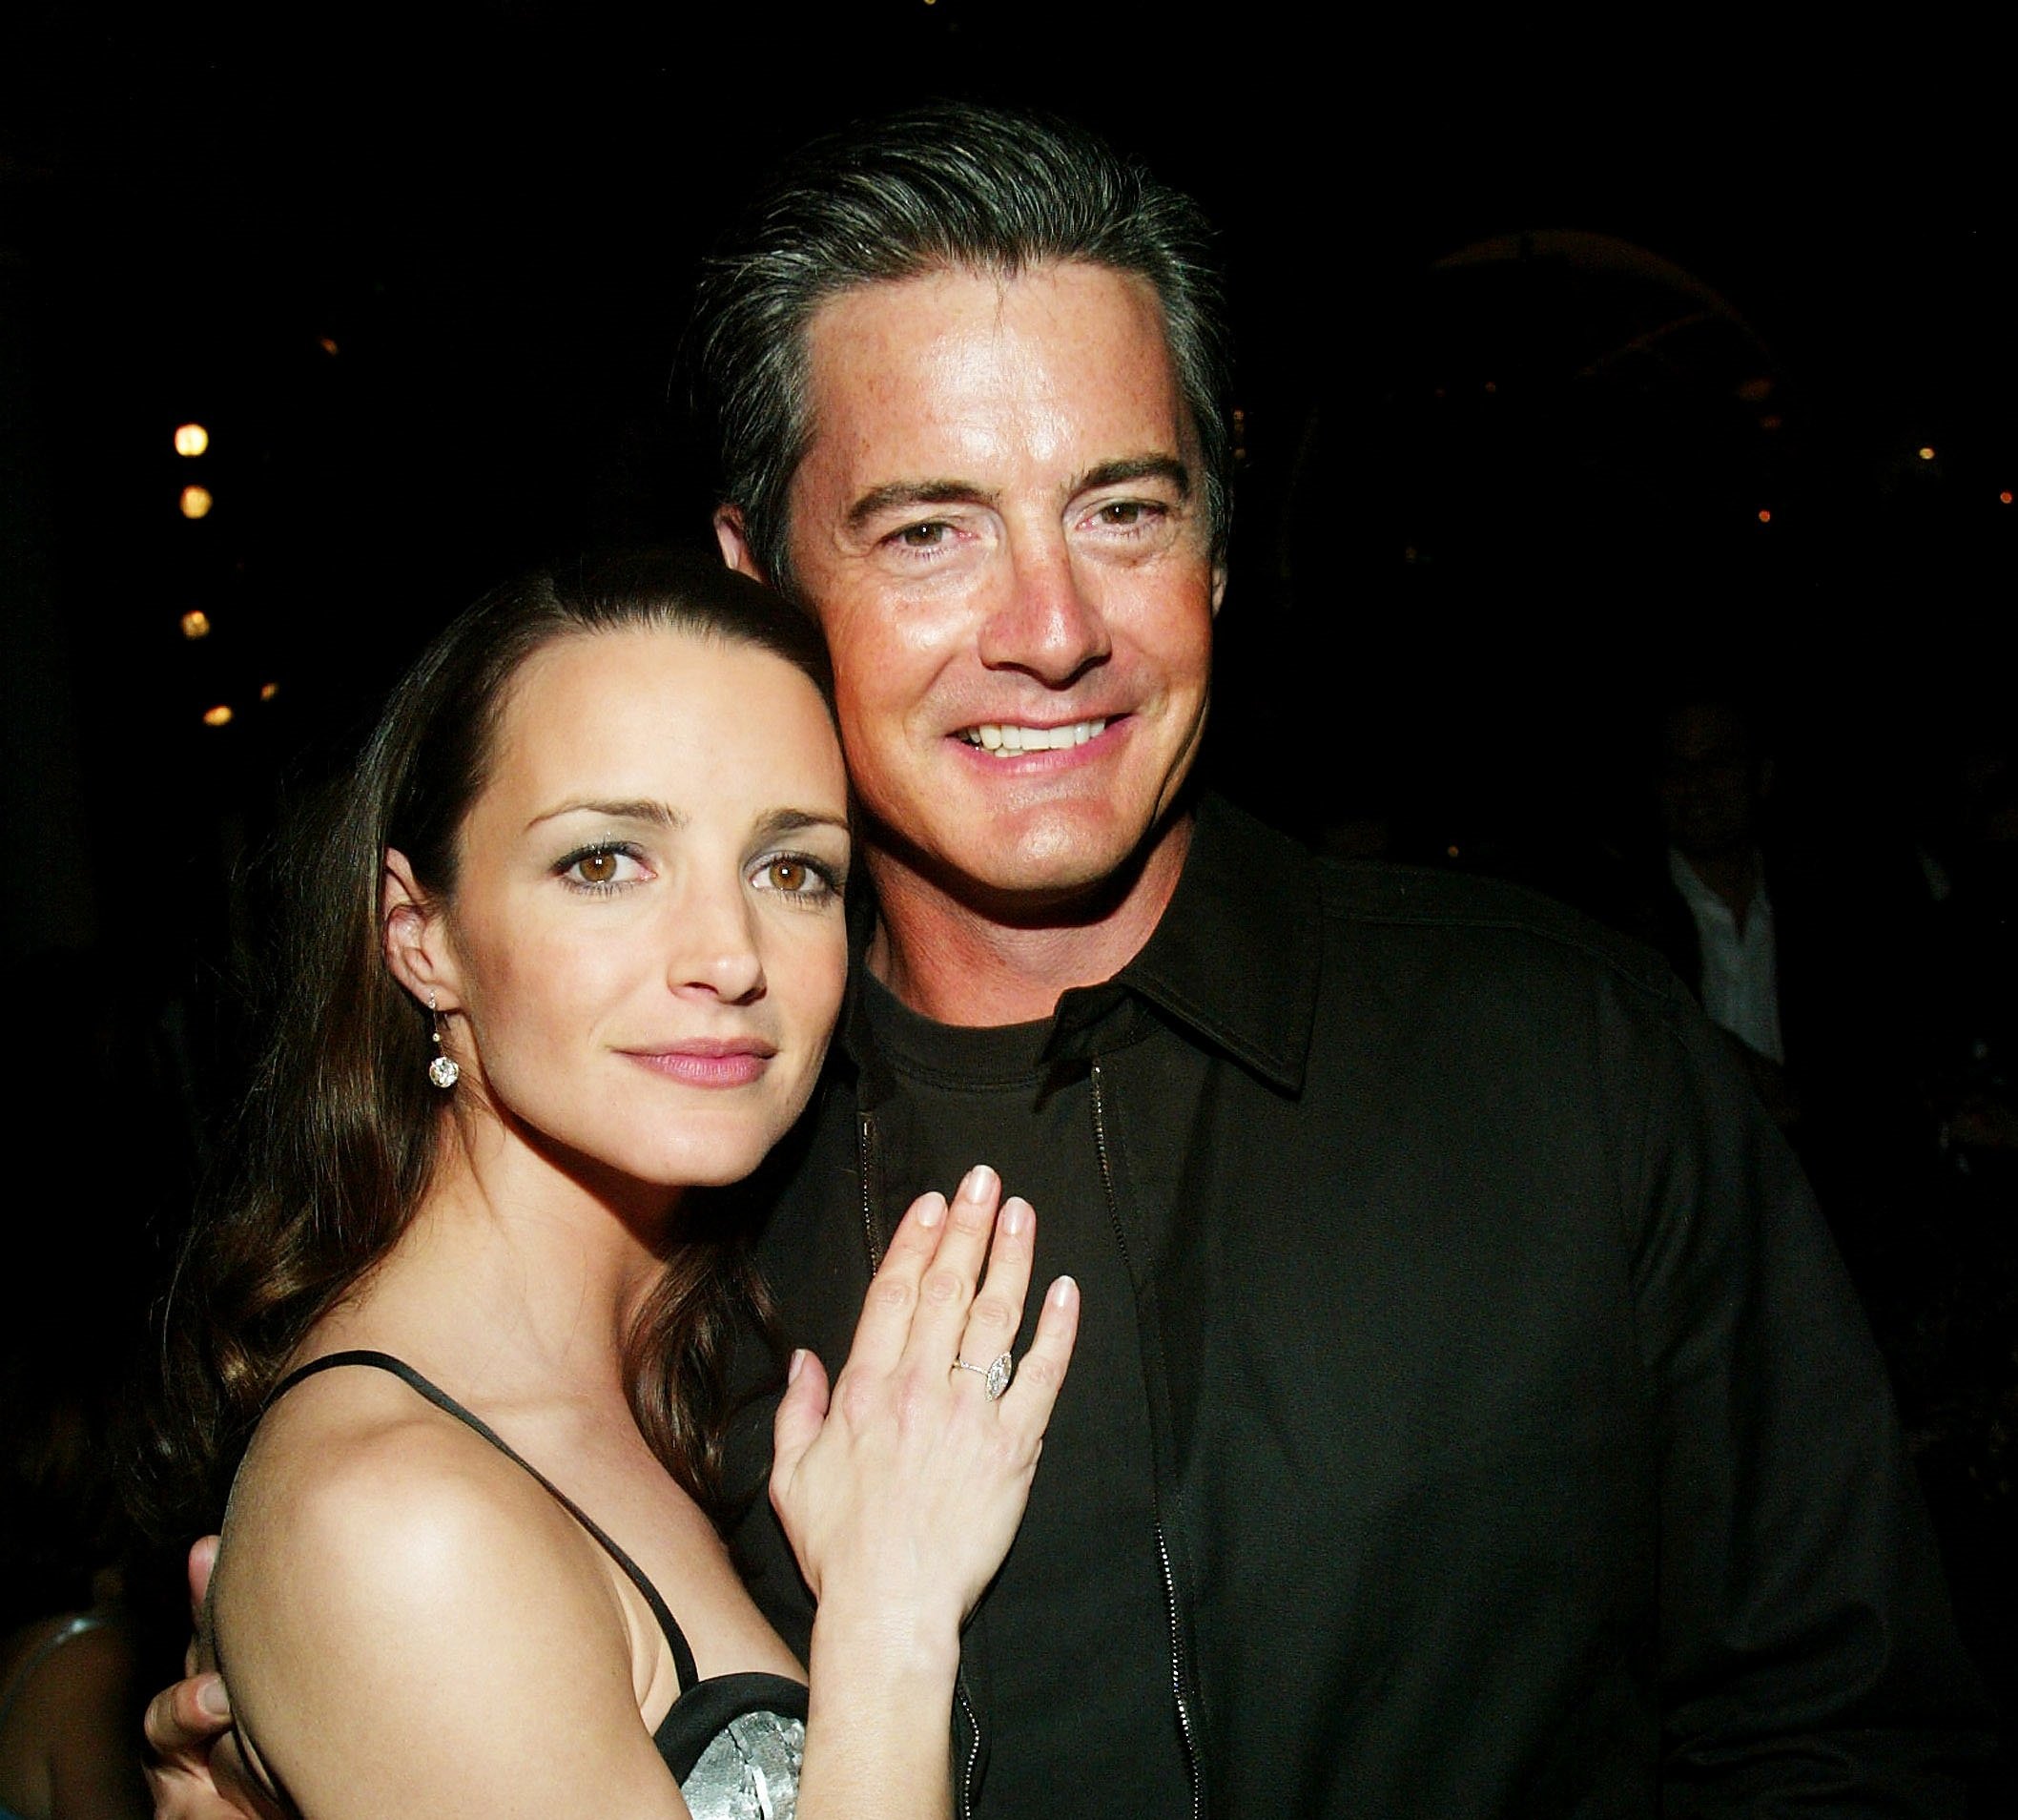 Kristin Davis and Kyle MacLachlan attend HBO'S 'Sex and The City' season premiere screening after-party at the American Museum of Natural History